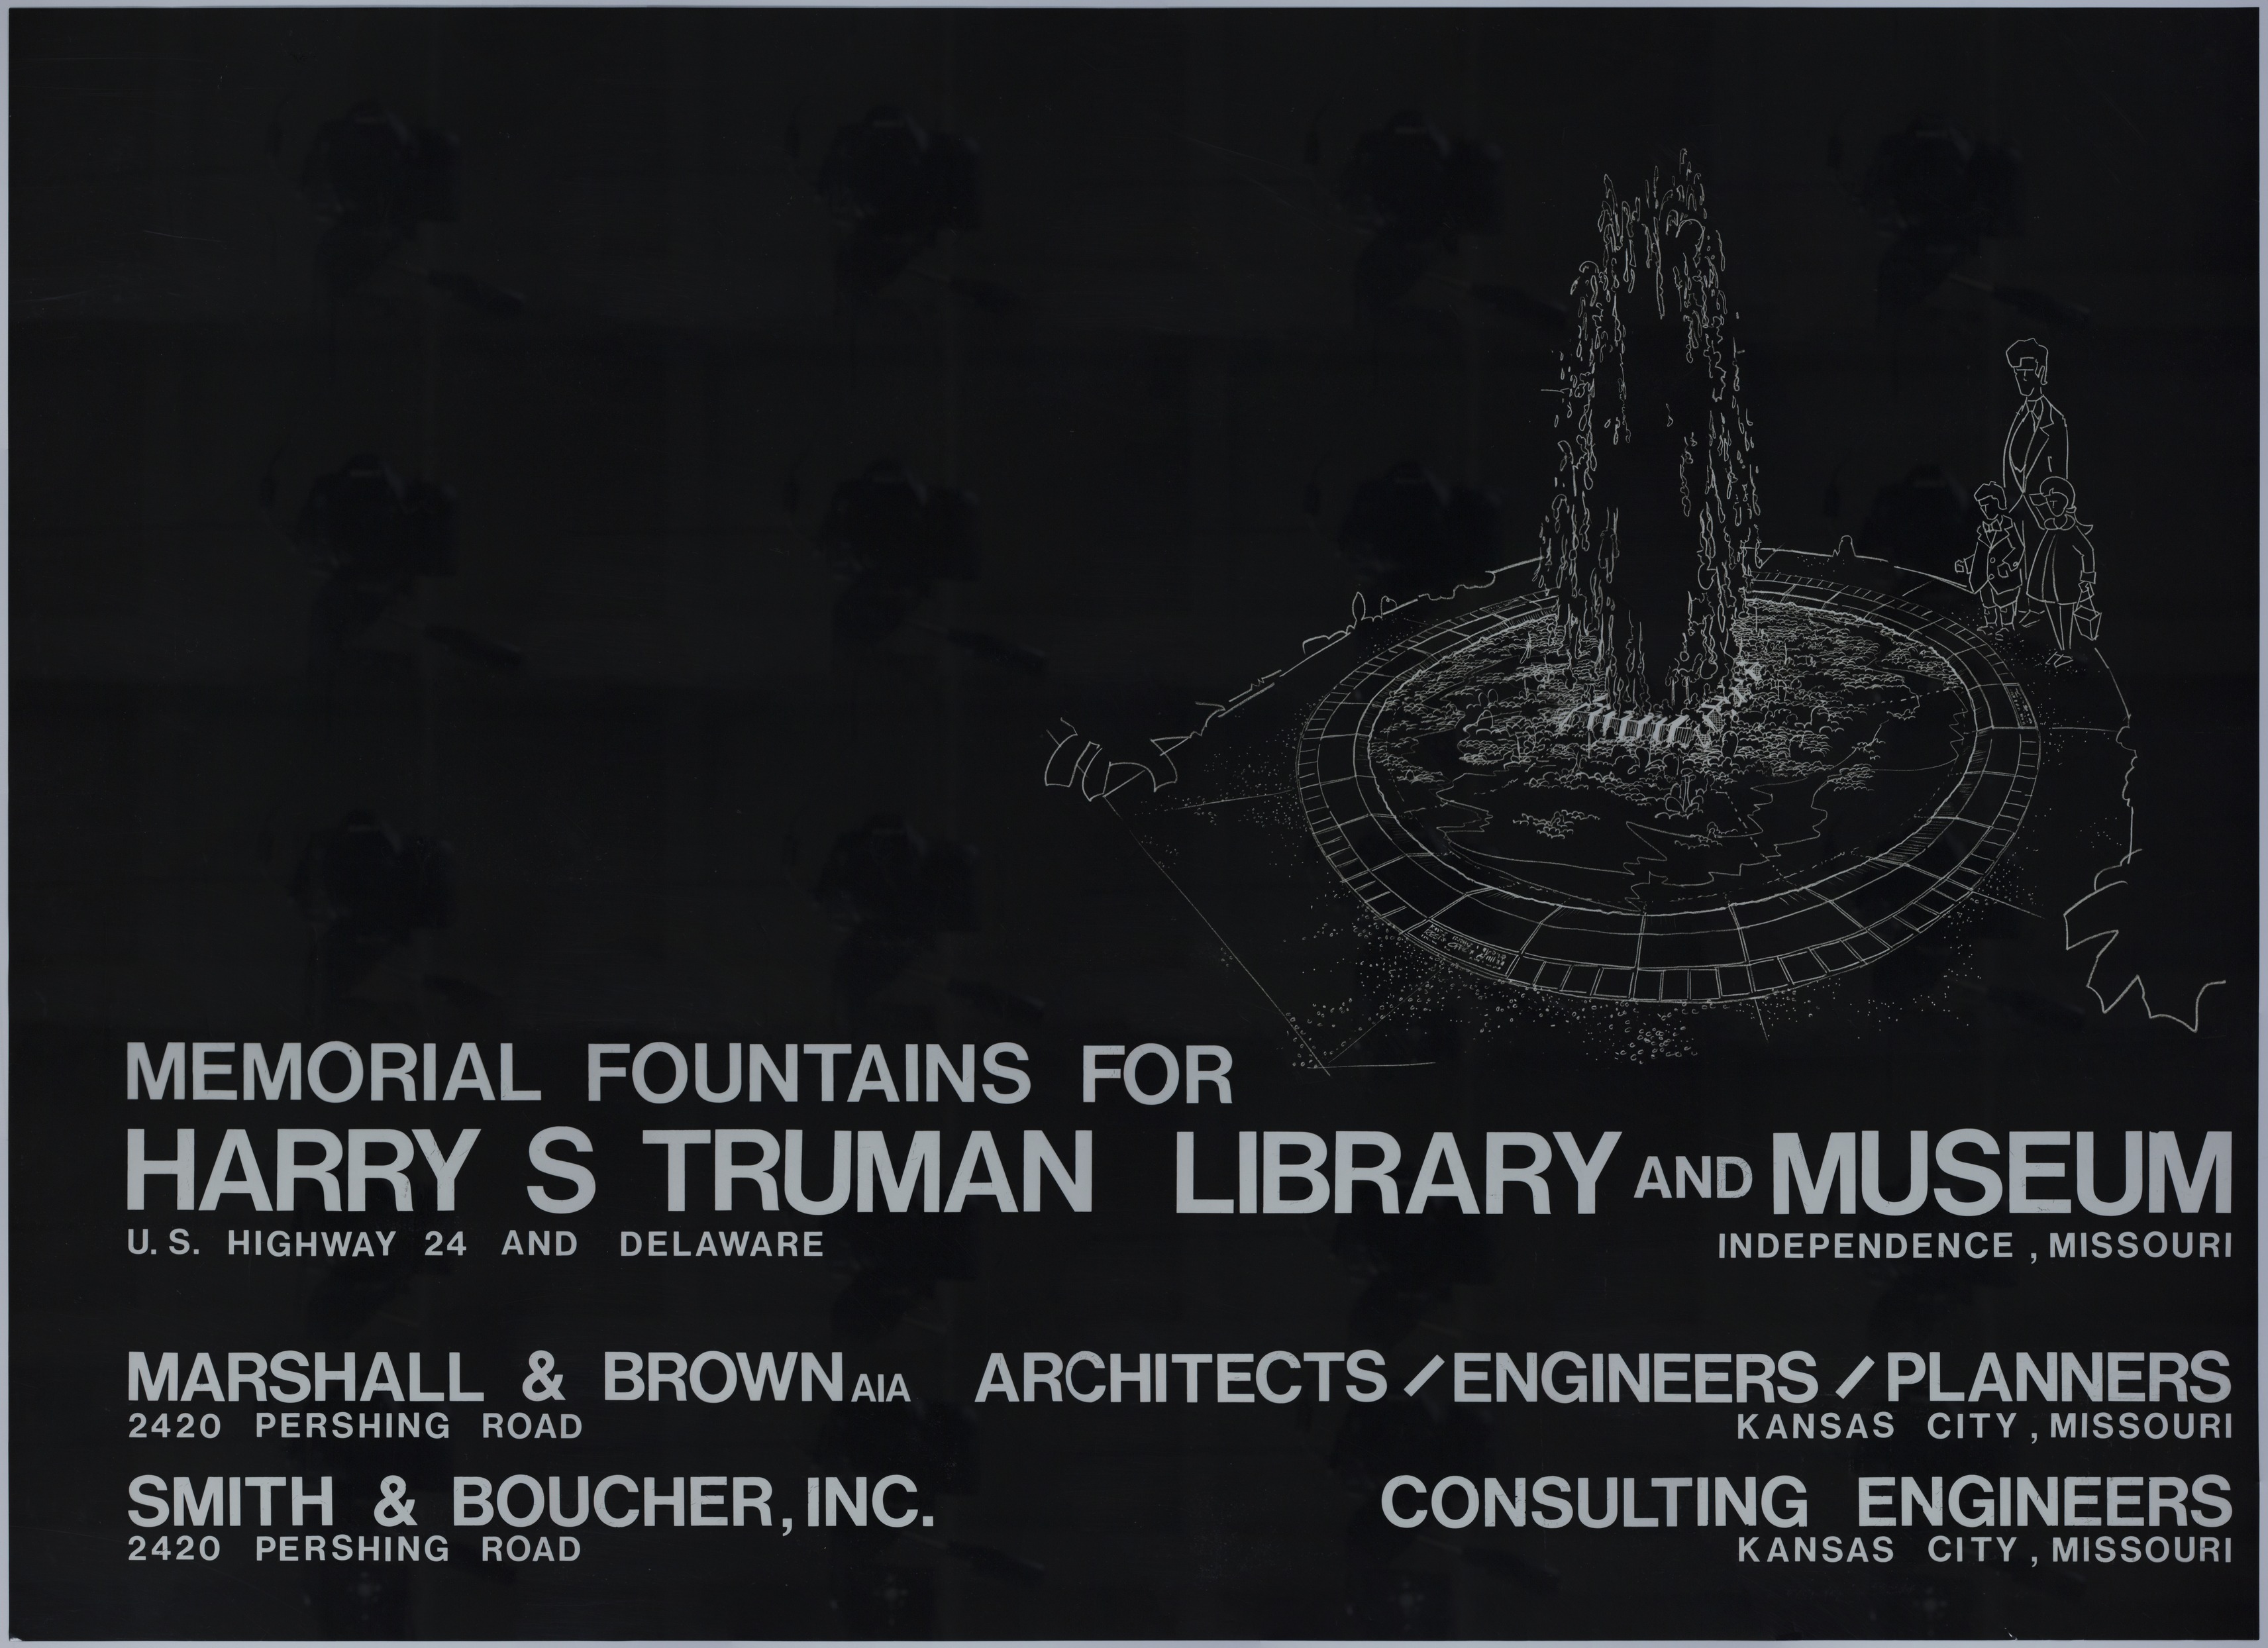 Drawing of the Proposed Memorial Fountains at the Harry S. Truman Library